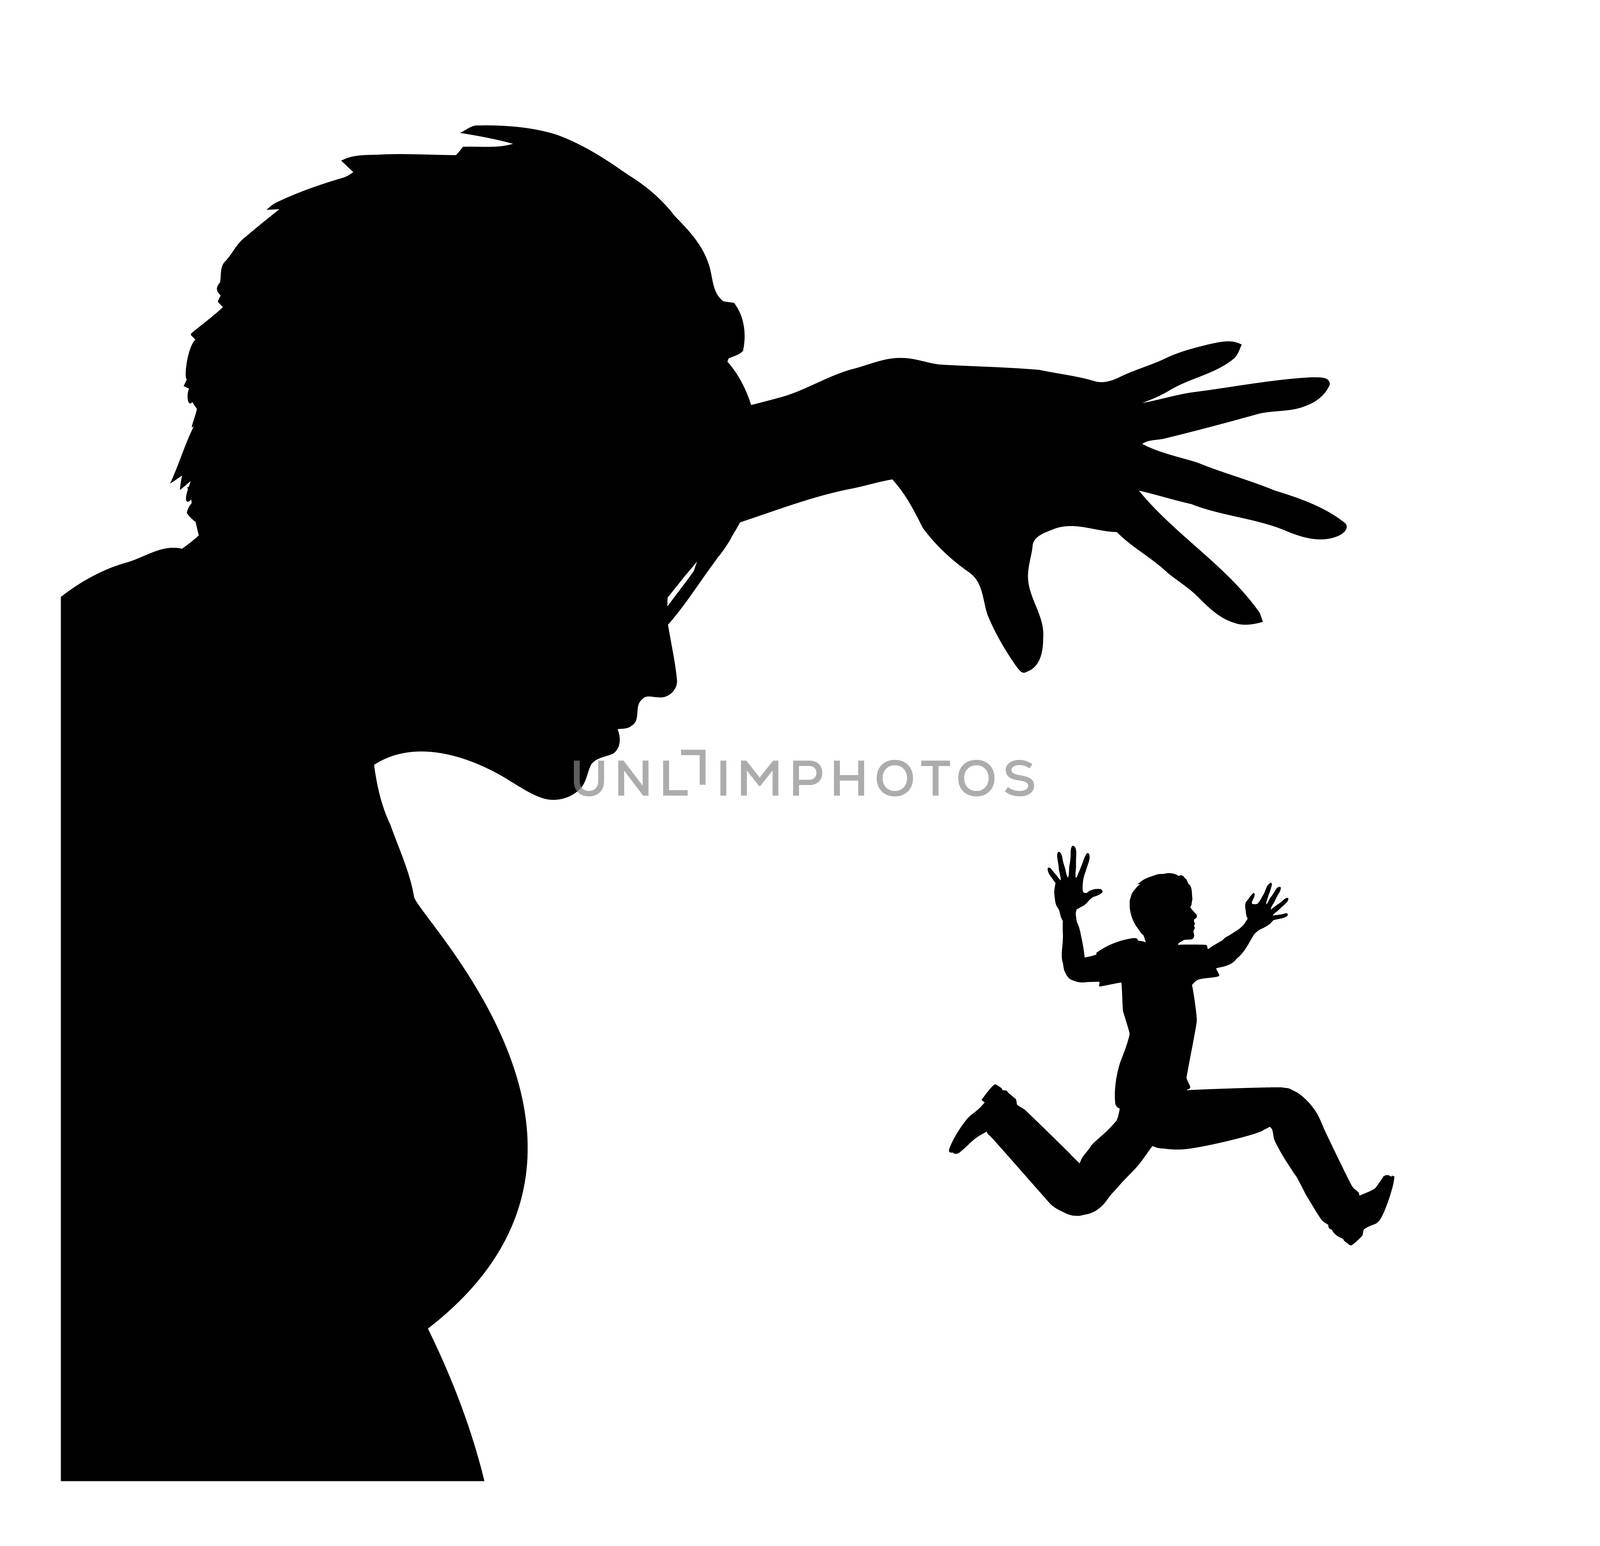 Humorous concept sign of a mean lady chasing a cowardly man trying to escape